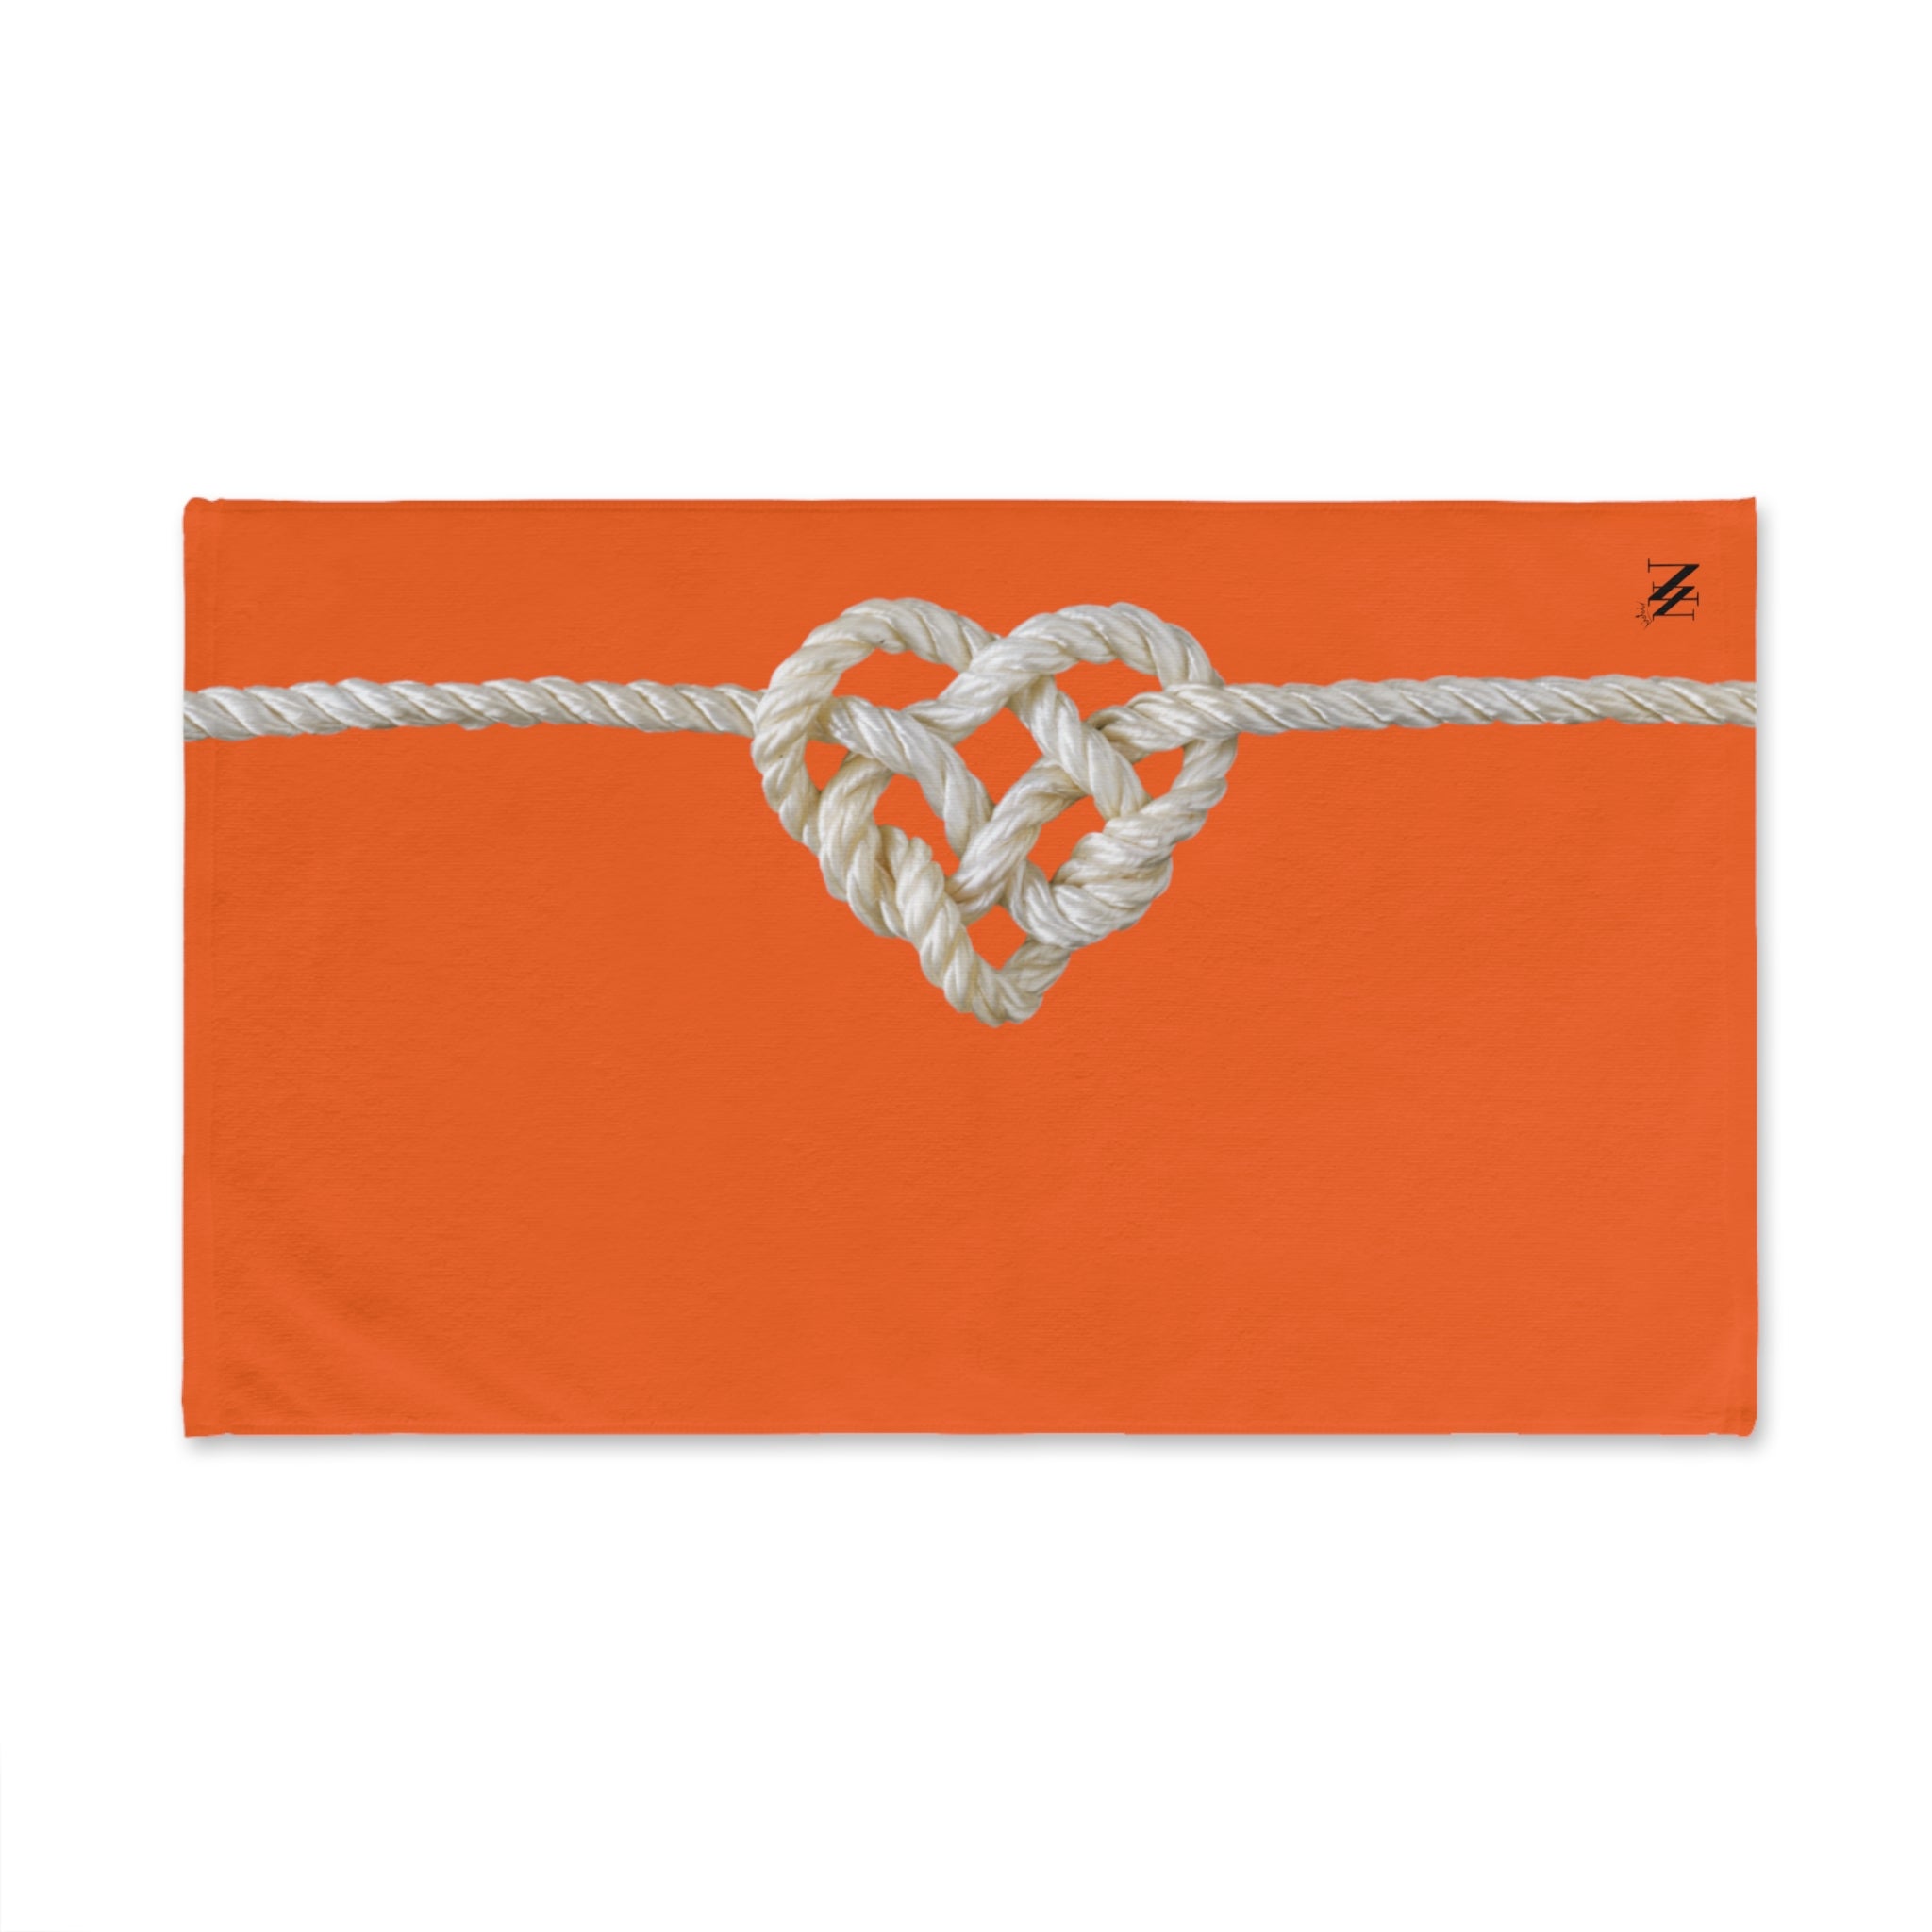 Heart Knot Orange | Funny Gifts for Men - Gifts for Him - Birthday Gifts for Men, Him, Husband, Boyfriend, New Couple Gifts, Fathers & Valentines Day Gifts, Hand Towels NECTAR NAPKINS